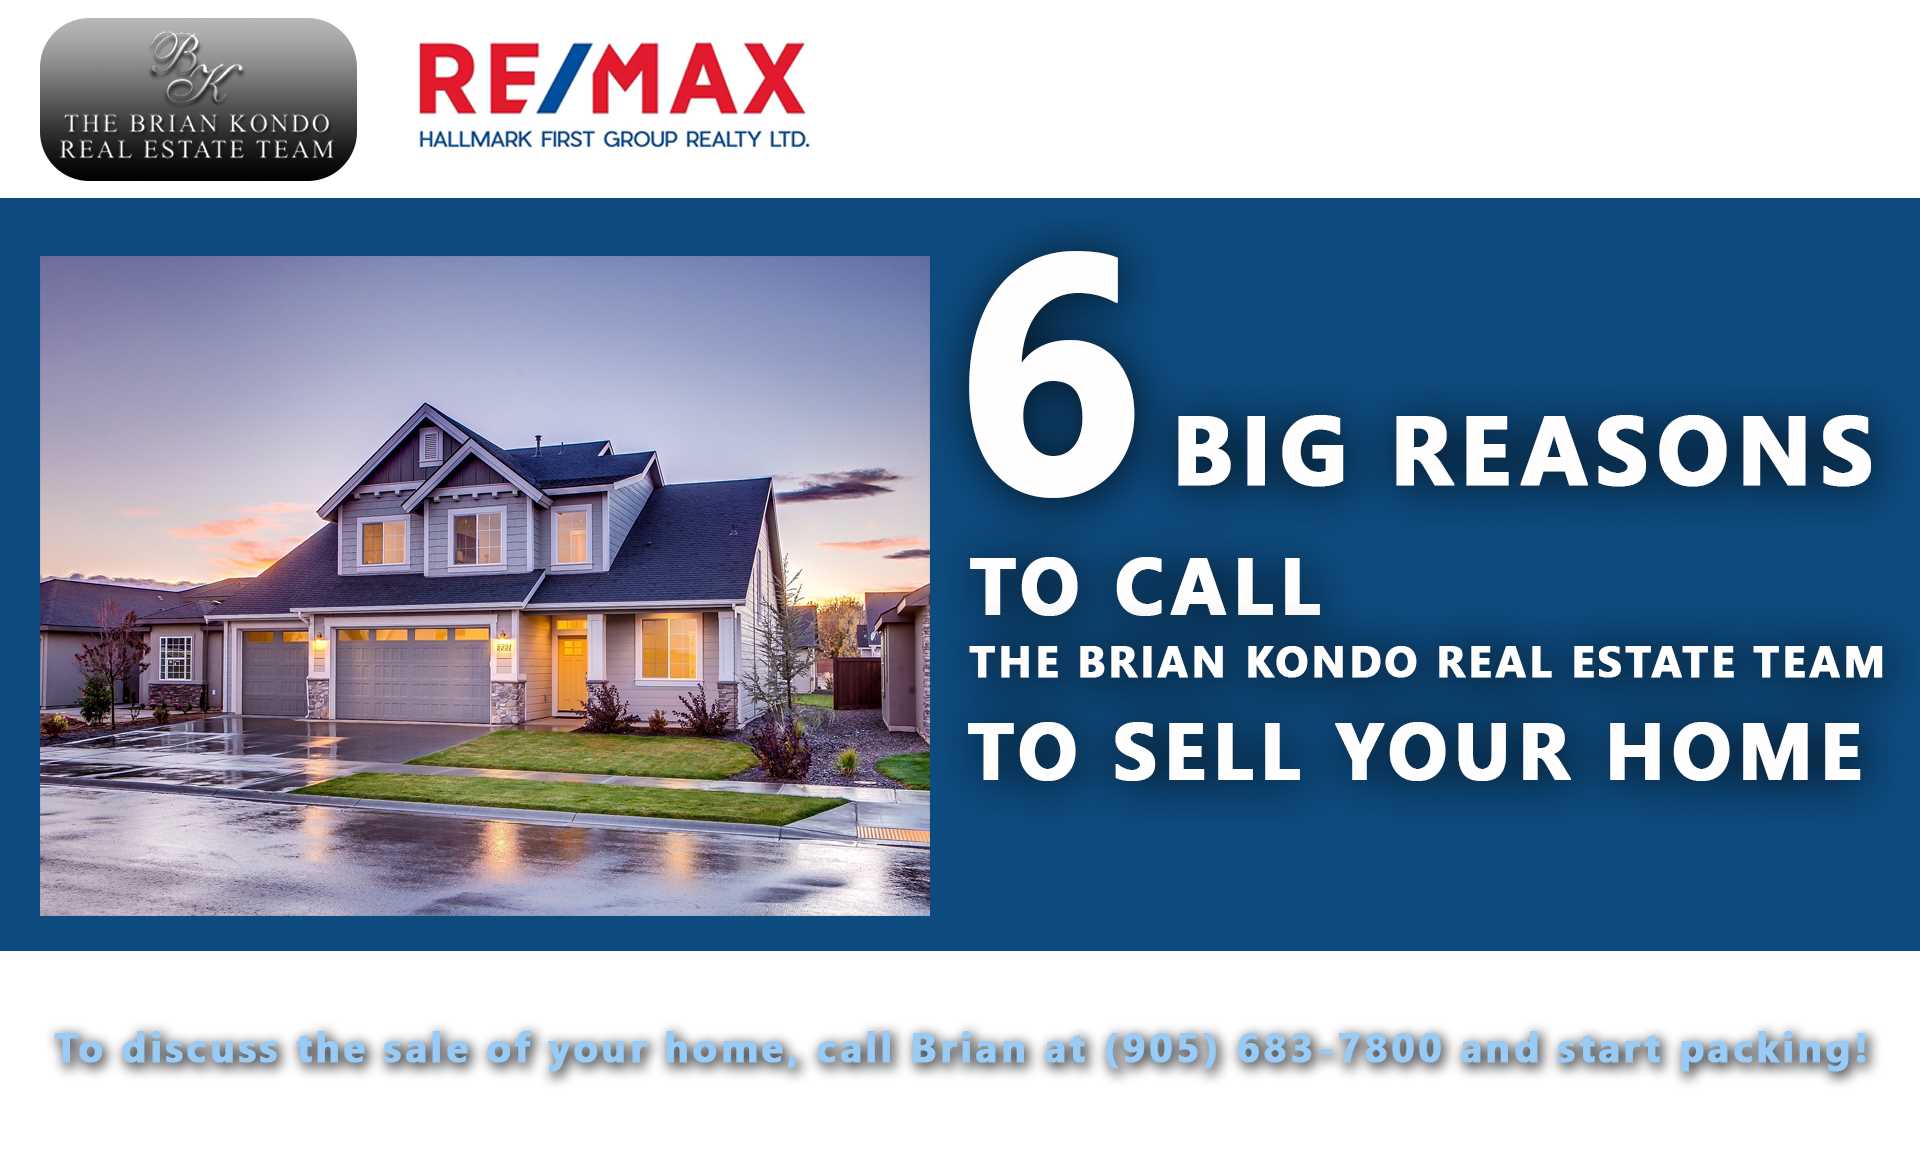 6 BIG REASONS TO CALL THE BRIAN KONDO REAL ESTATE TEAM TO SELL YOUR HOME